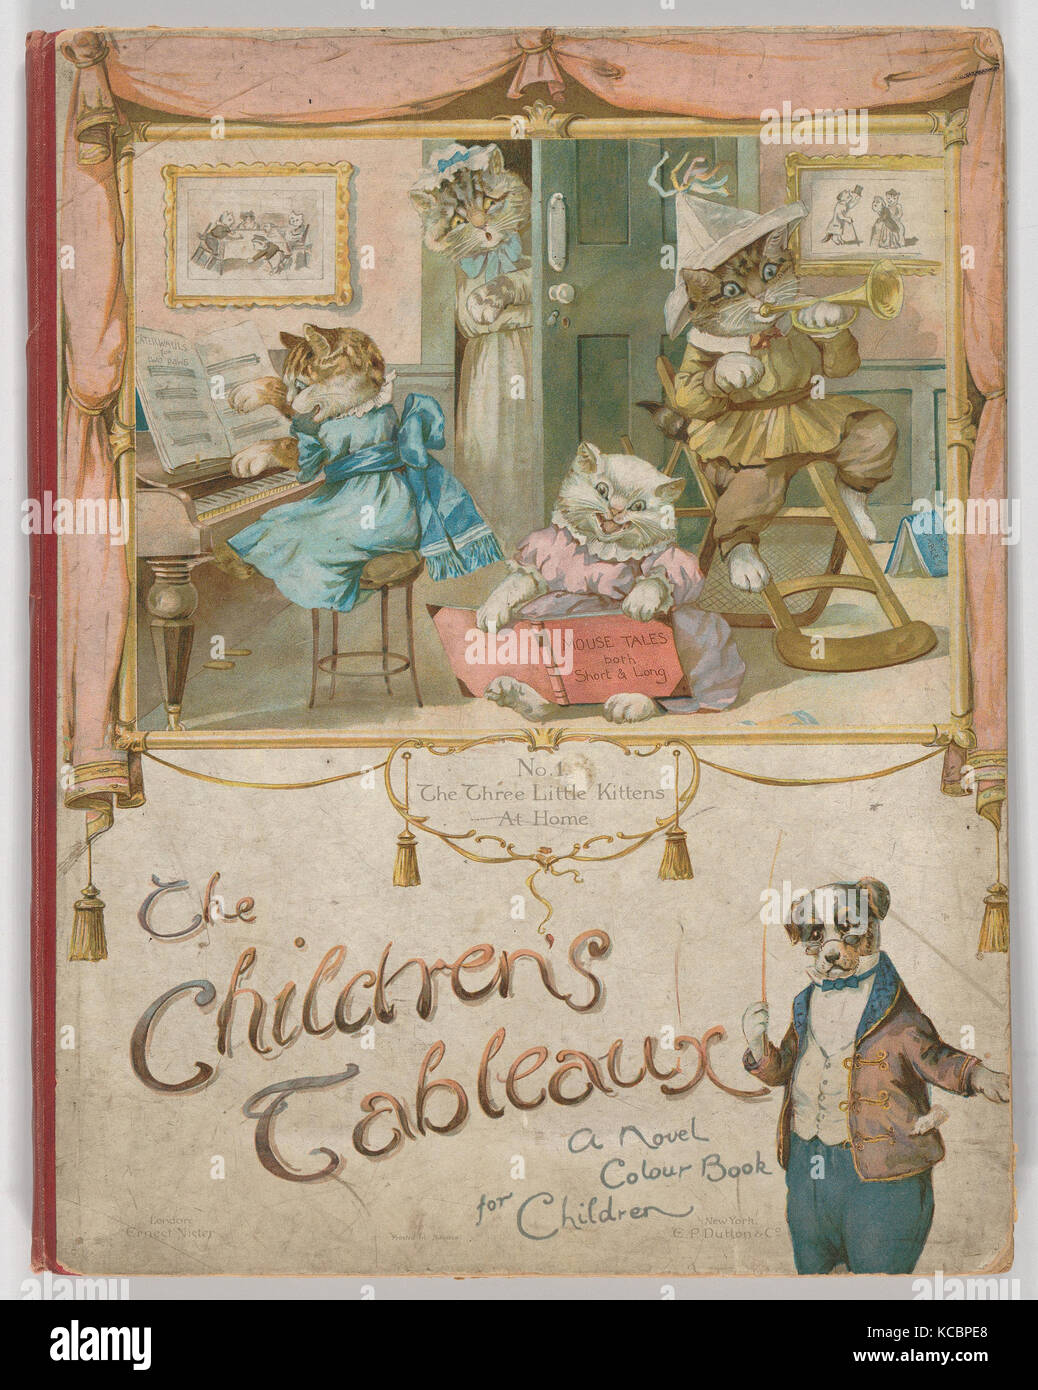 The Children's Tableaux. A Novel Colour Book with Pictures Arranged as Tableaux, ca. 1895 Stock Photo